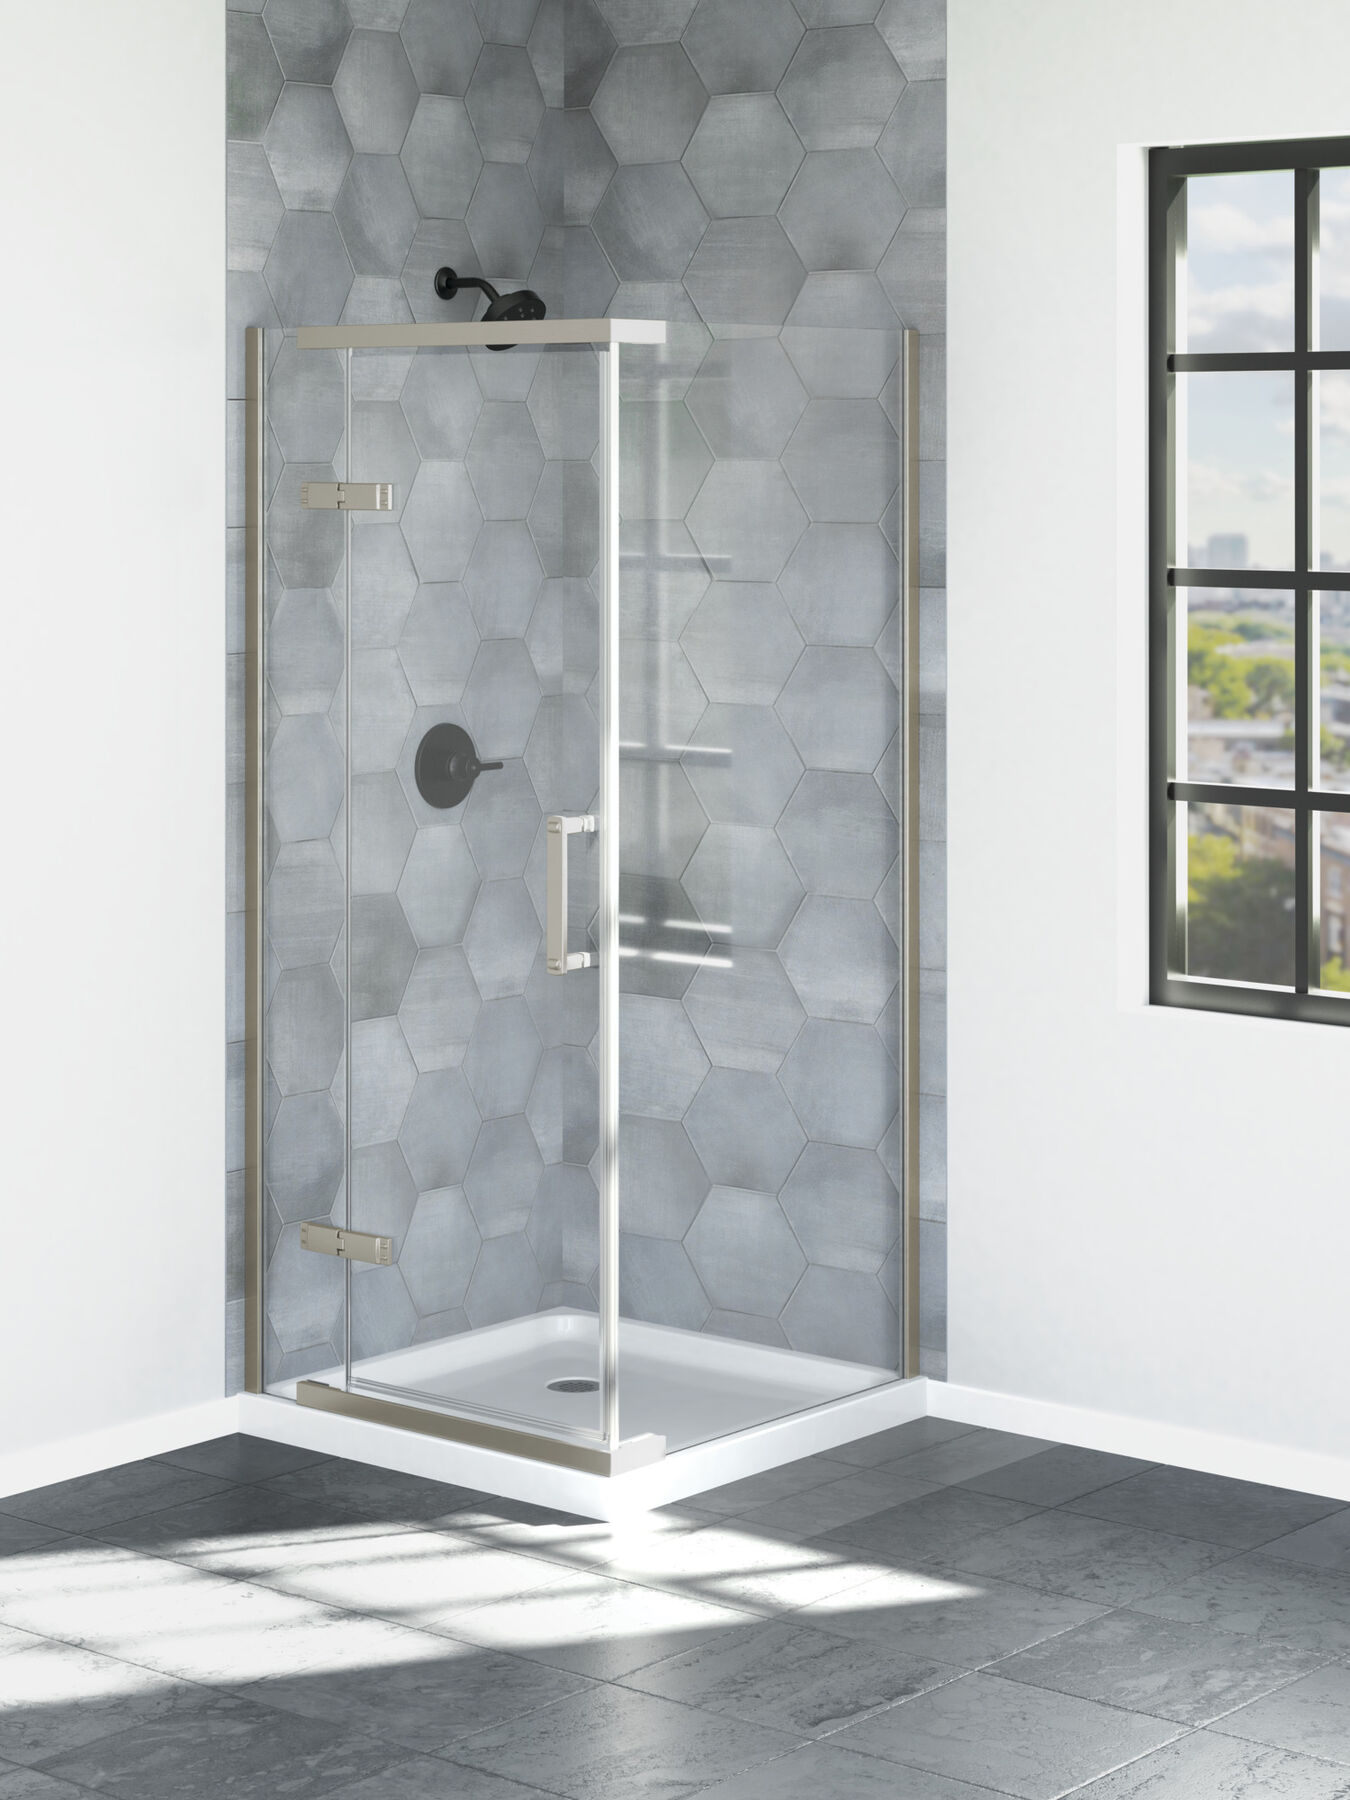 36”x36” Stainless Corner Shower Enclosure in Stainless B11472-3636-SS